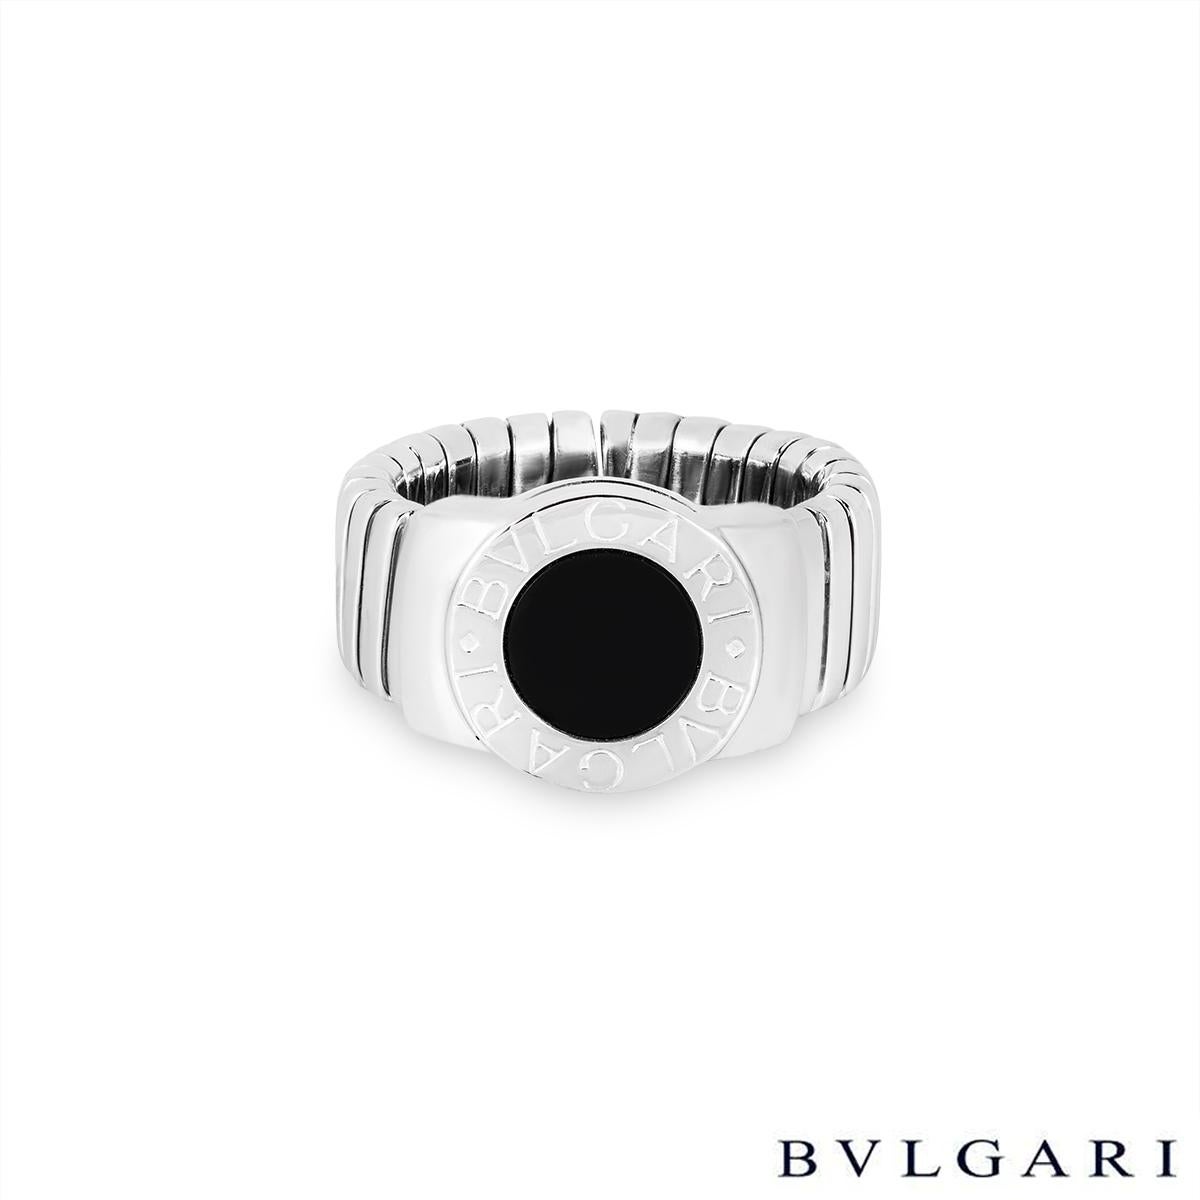 Bvlgari Bvlgari White Gold Onyx Tubogas Ring In Excellent Condition For Sale In London, GB